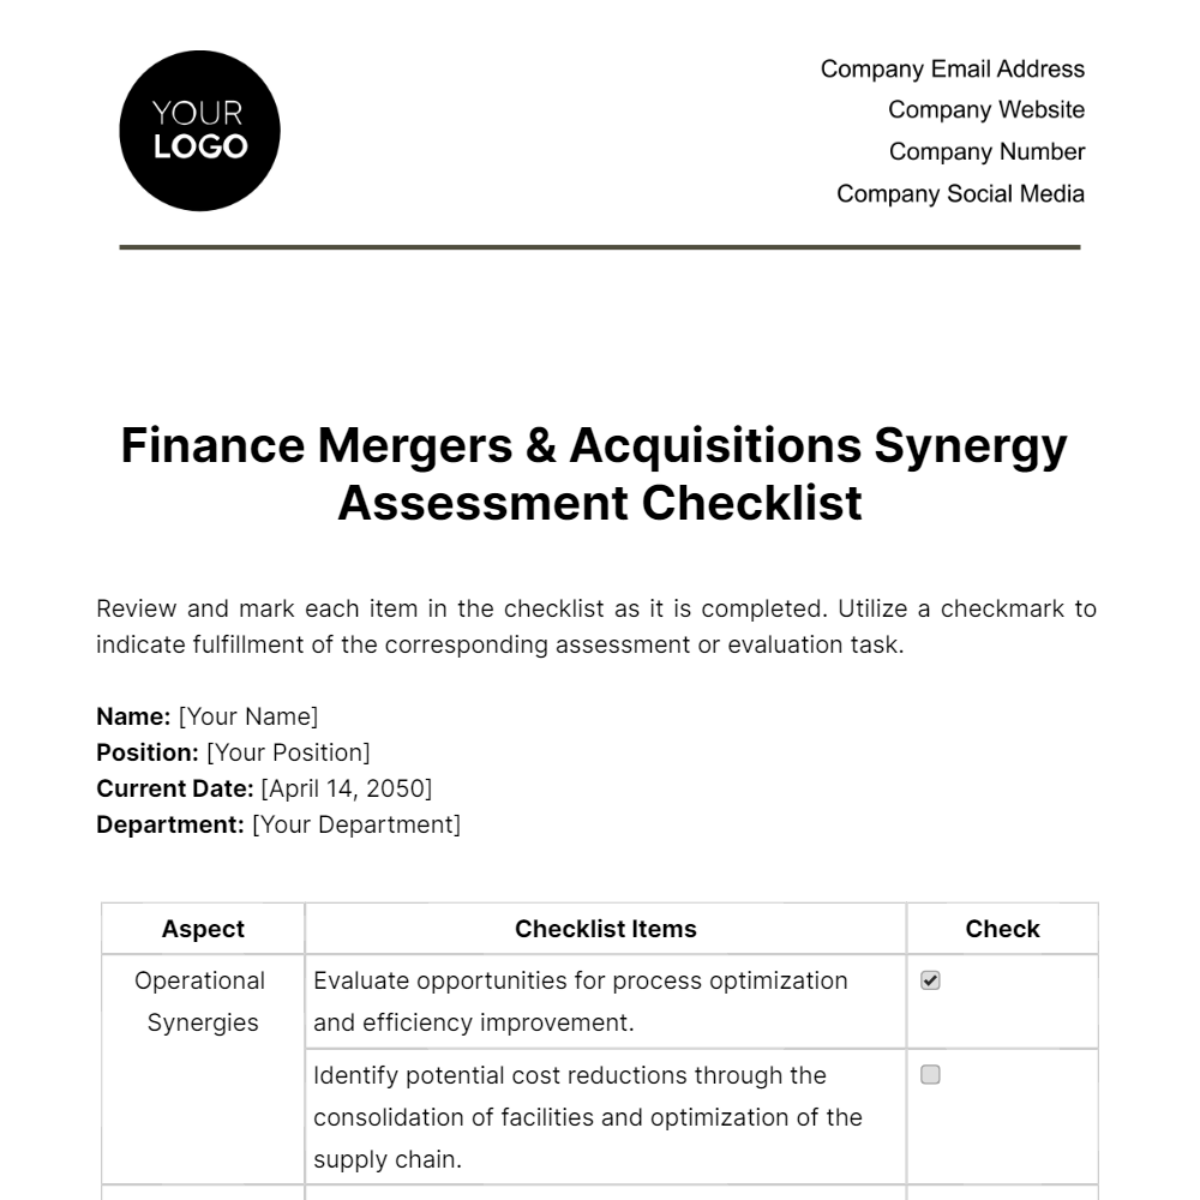 Finance Mergers & Acquisitions Synergy Assessment Checklist Template